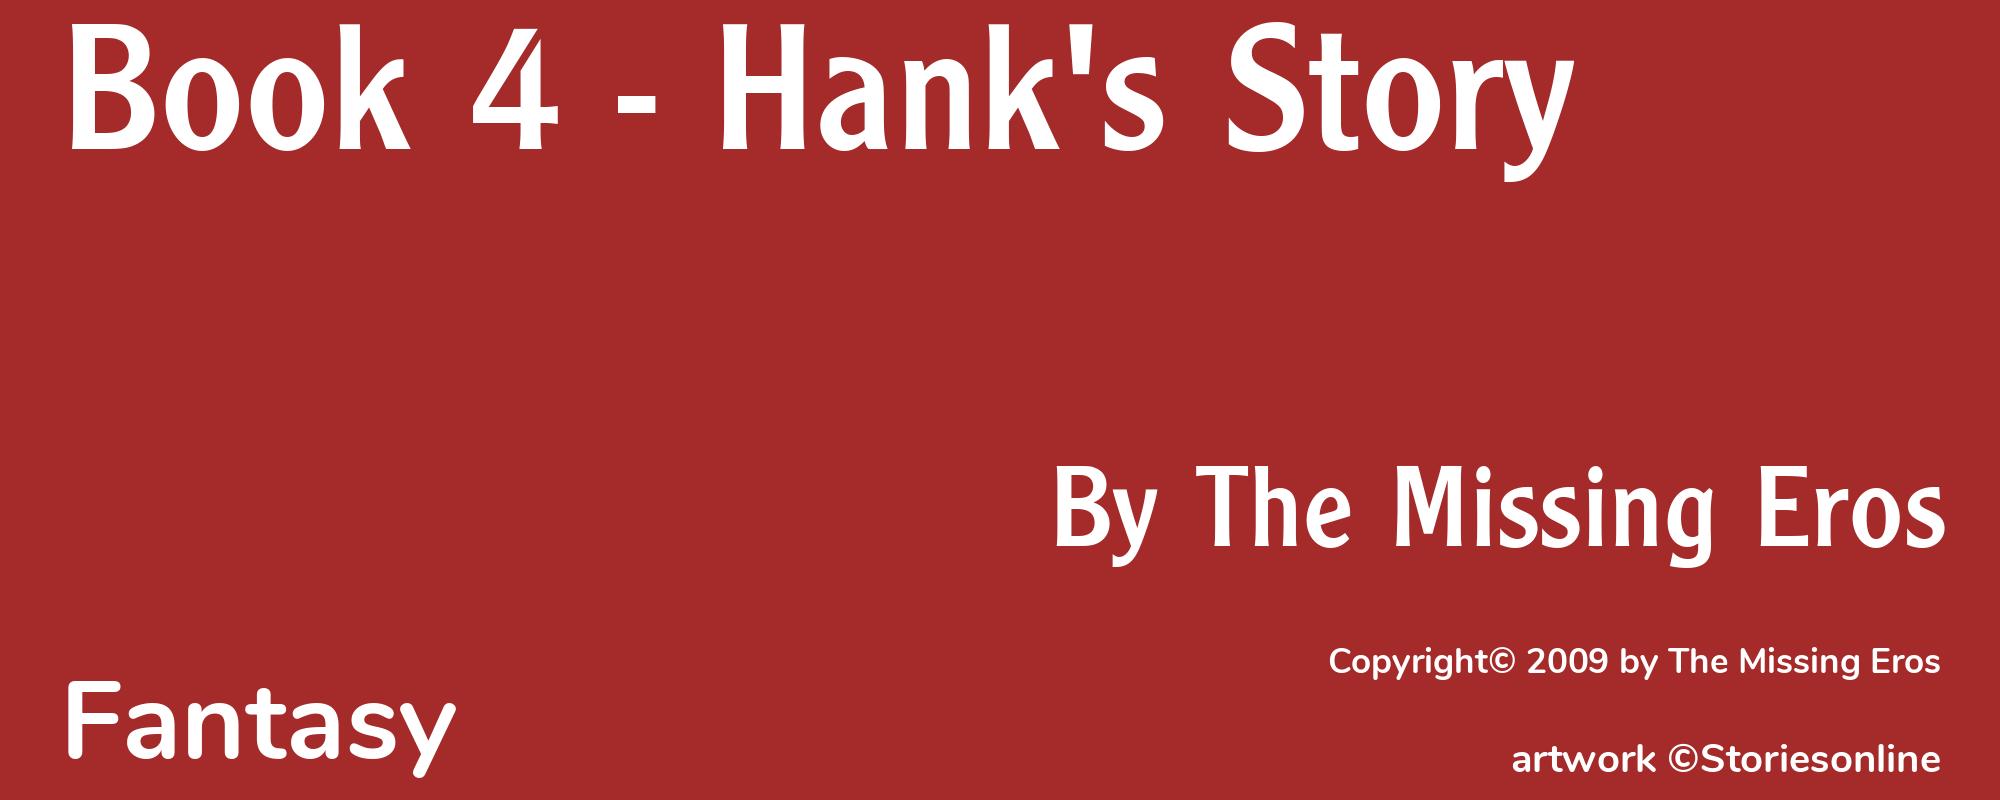 Book 4 - Hank's Story - Cover